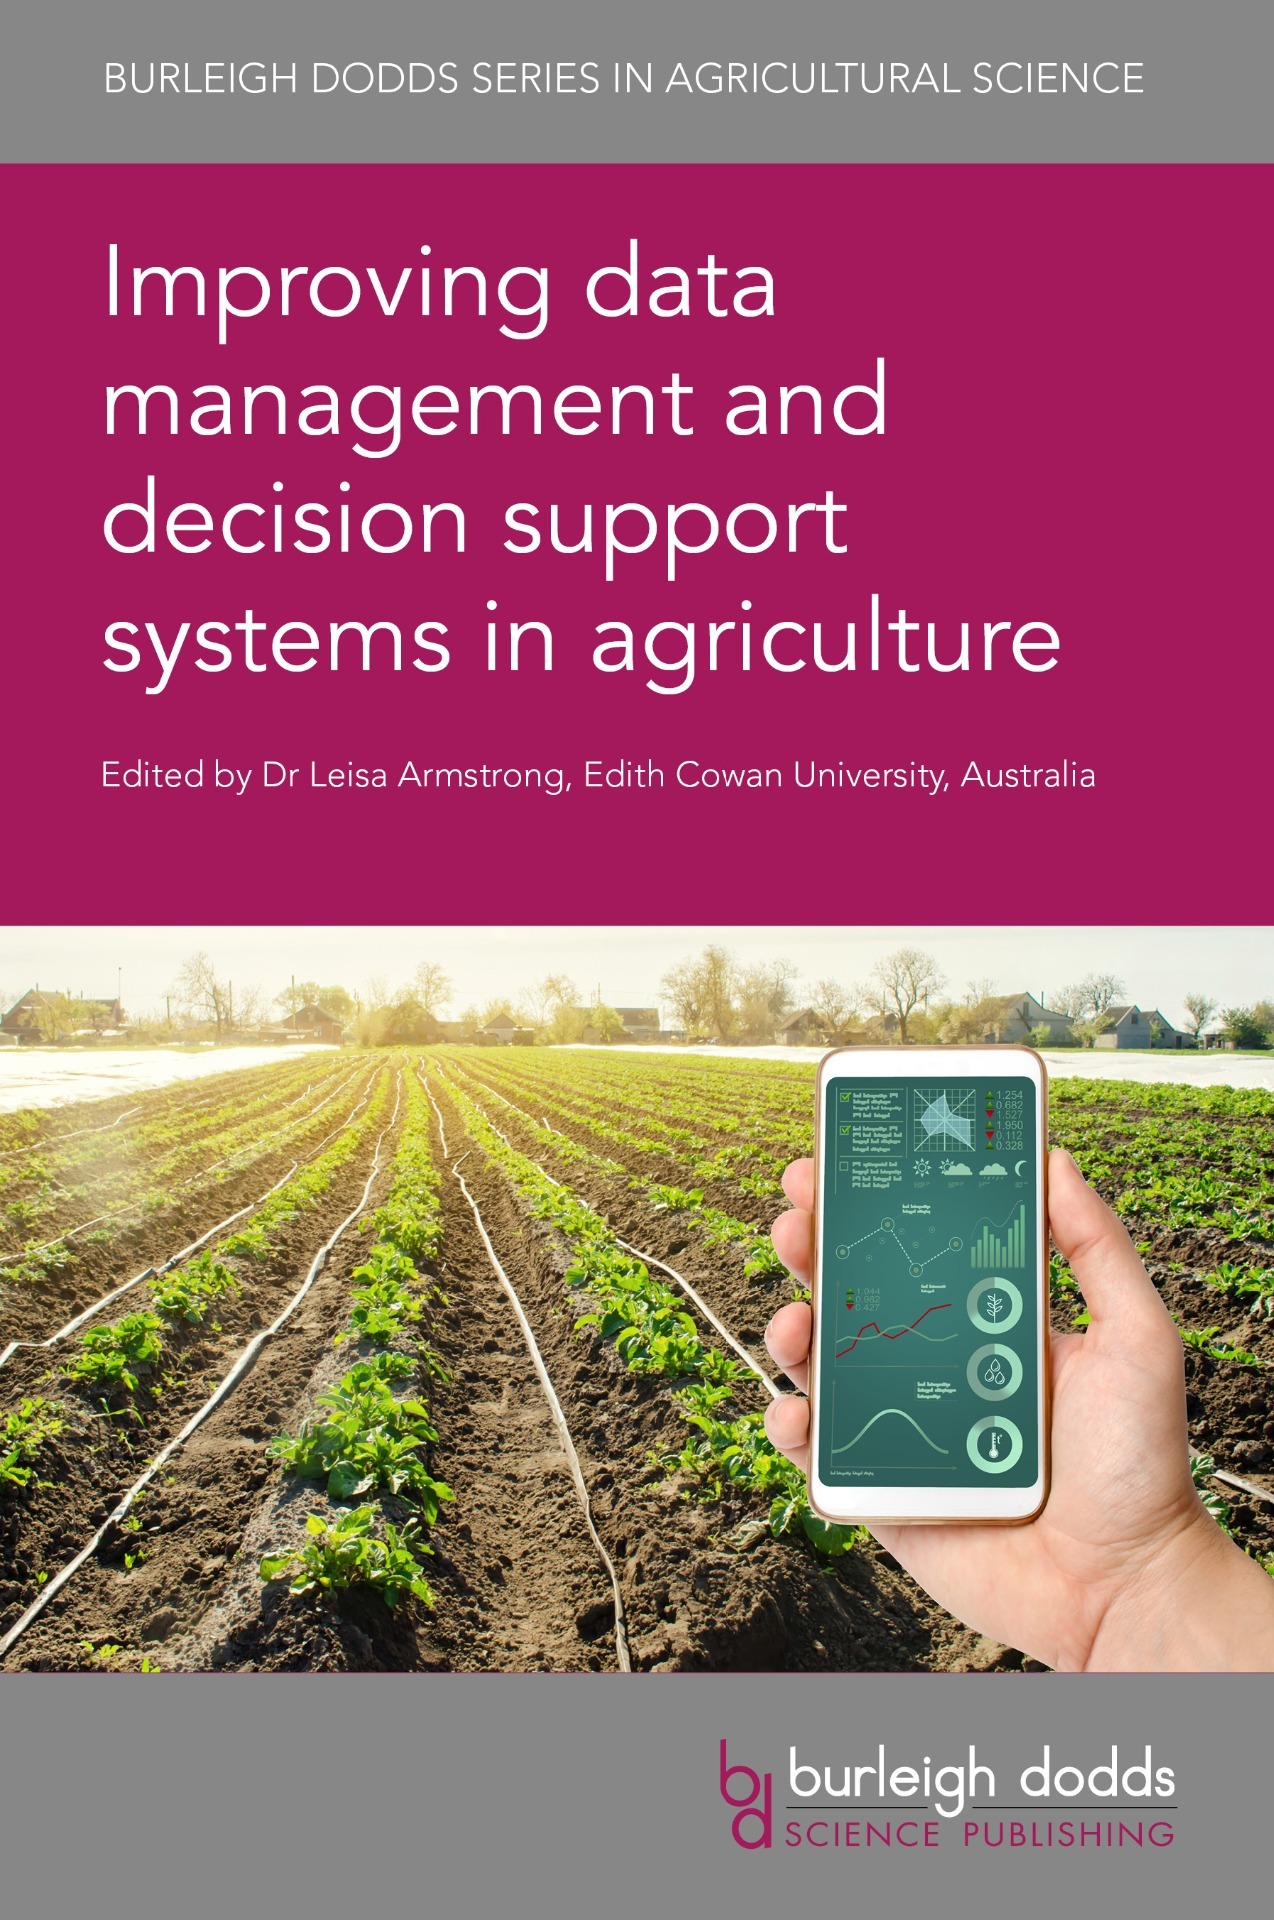 Advances in crop modelling for a sustainable agriculture